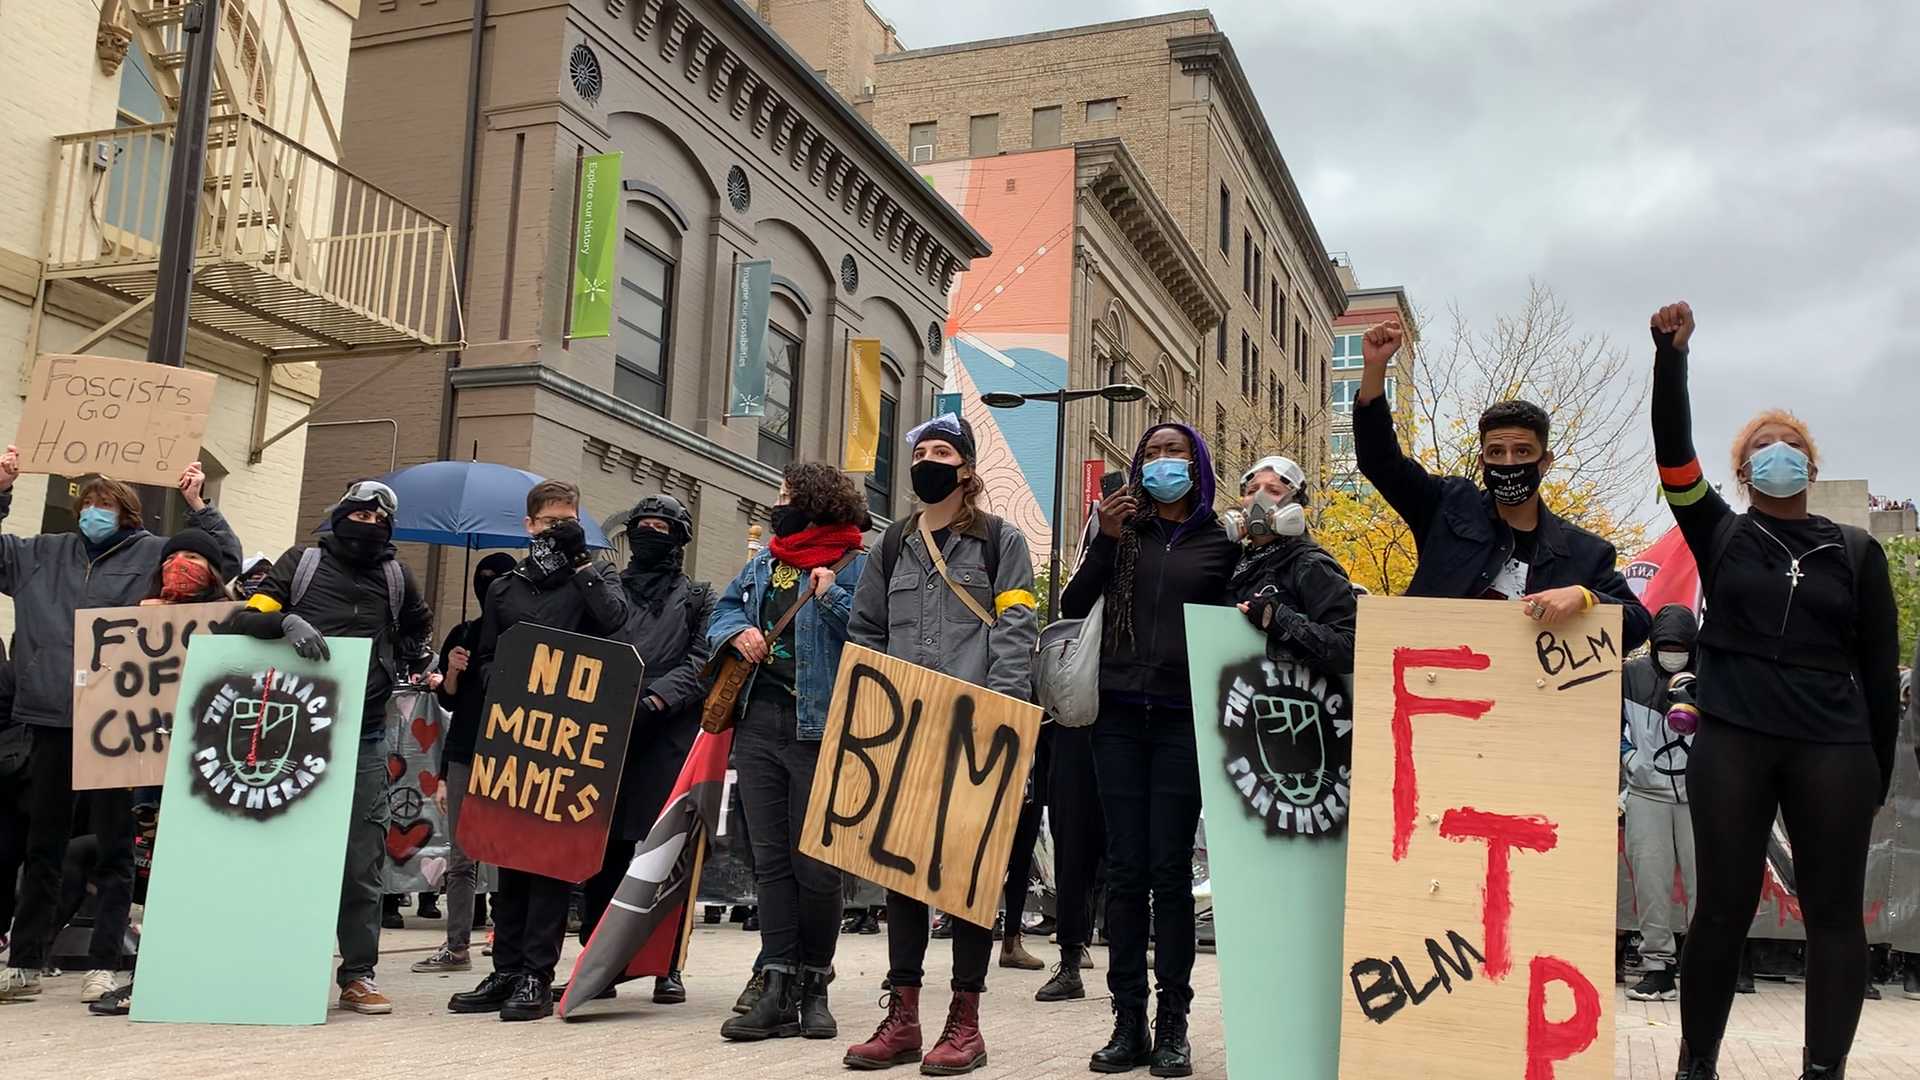 Back the Blue rally generates counterprotest